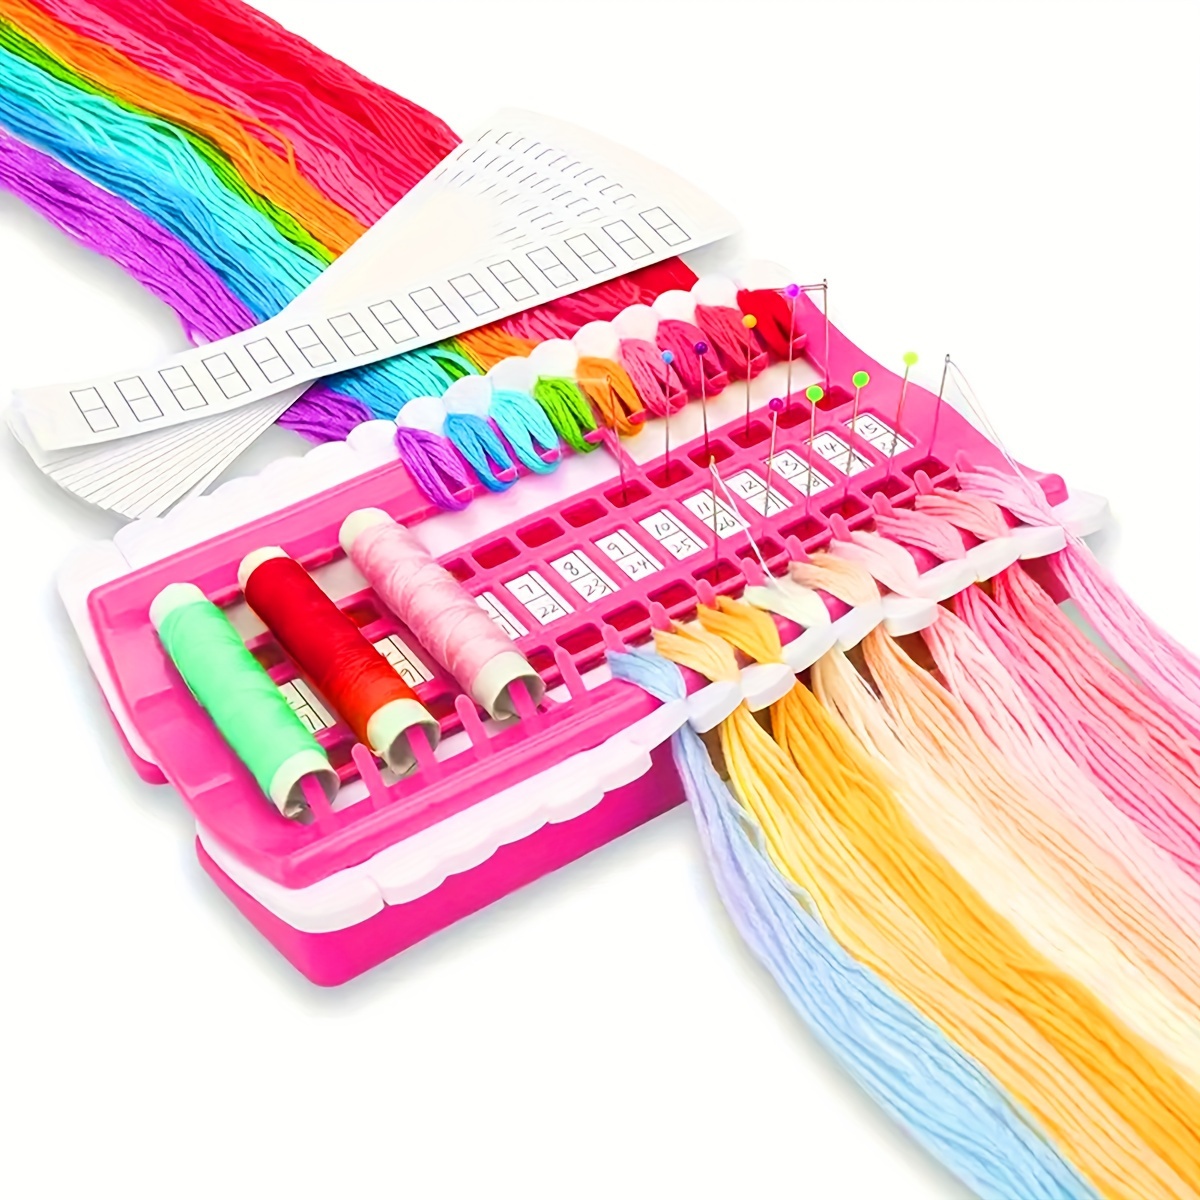 Floss Organizer Sewing Tools 50 Positions Cross Stitch Row Line Tool Set  Sewing Needles Holder Embroidery Floss Thread Organizer DIY